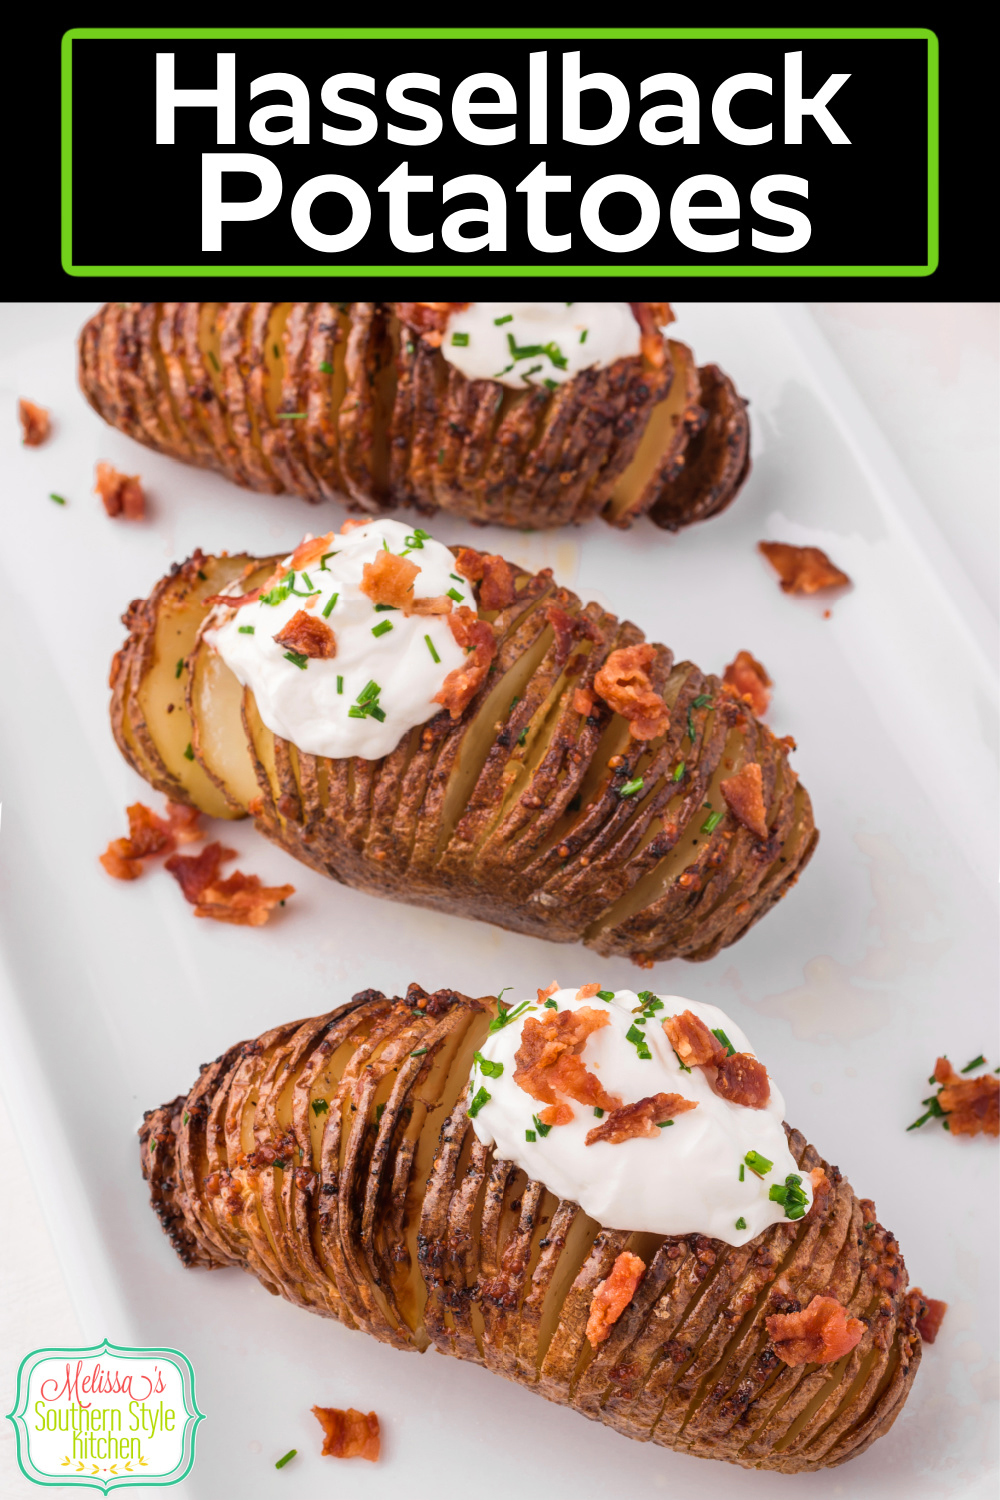 These easy Hasselback Potatoes are an impressive and delicious side dish served topped with a dollop of sour cream, crumbled bacon and chives. #hasselbackpotatoes #bakedpotatoes #easypotatoes #potatorecipes via @melissasssk